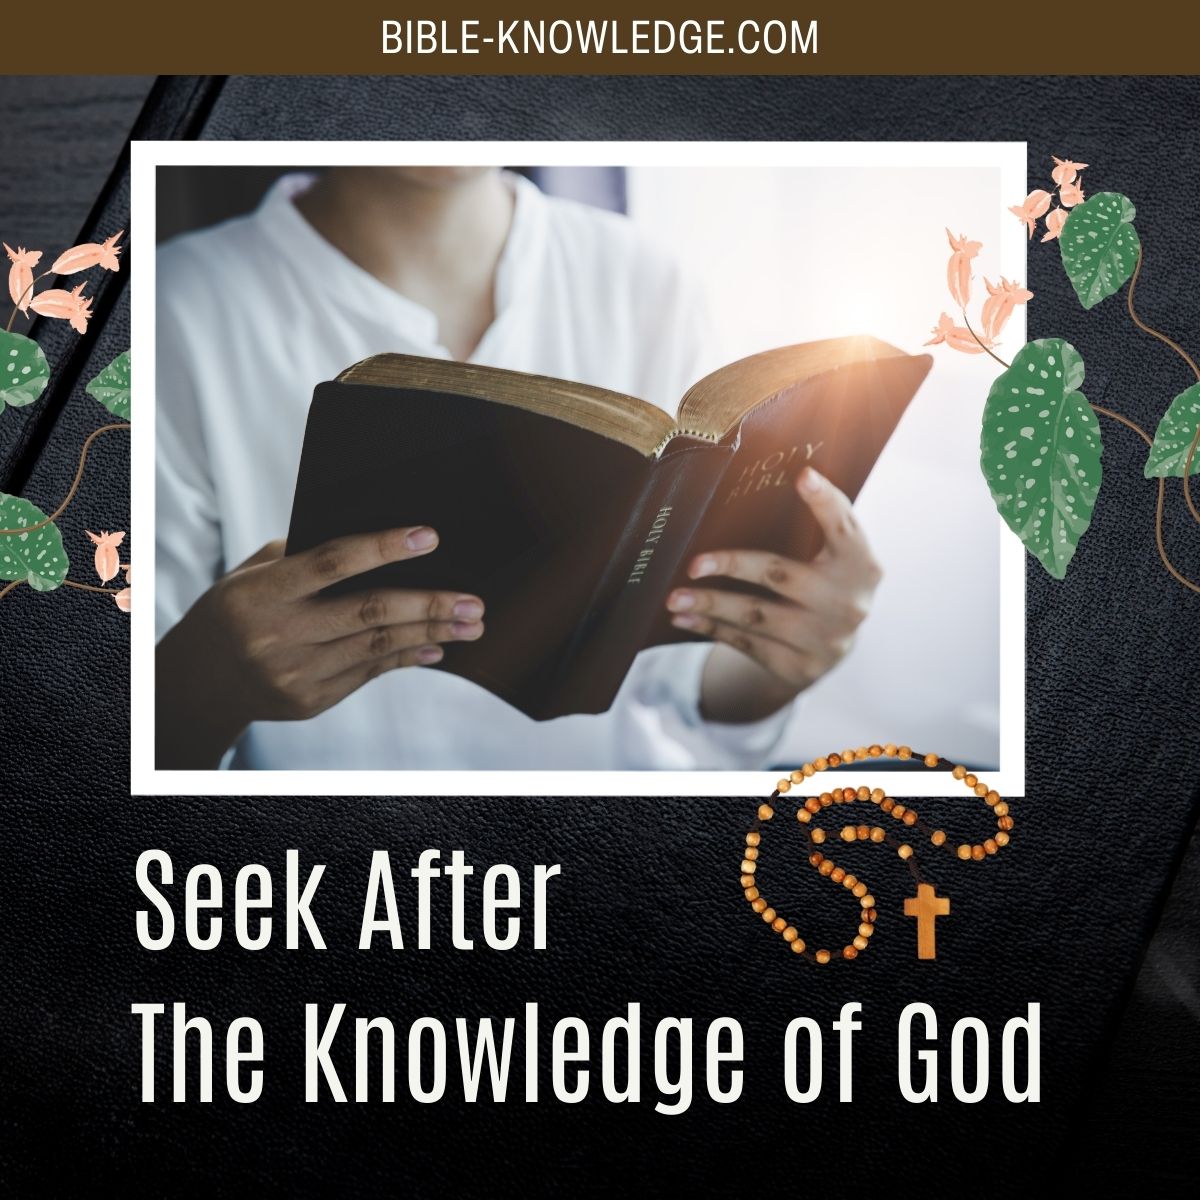 Seek After The Knowledge of God